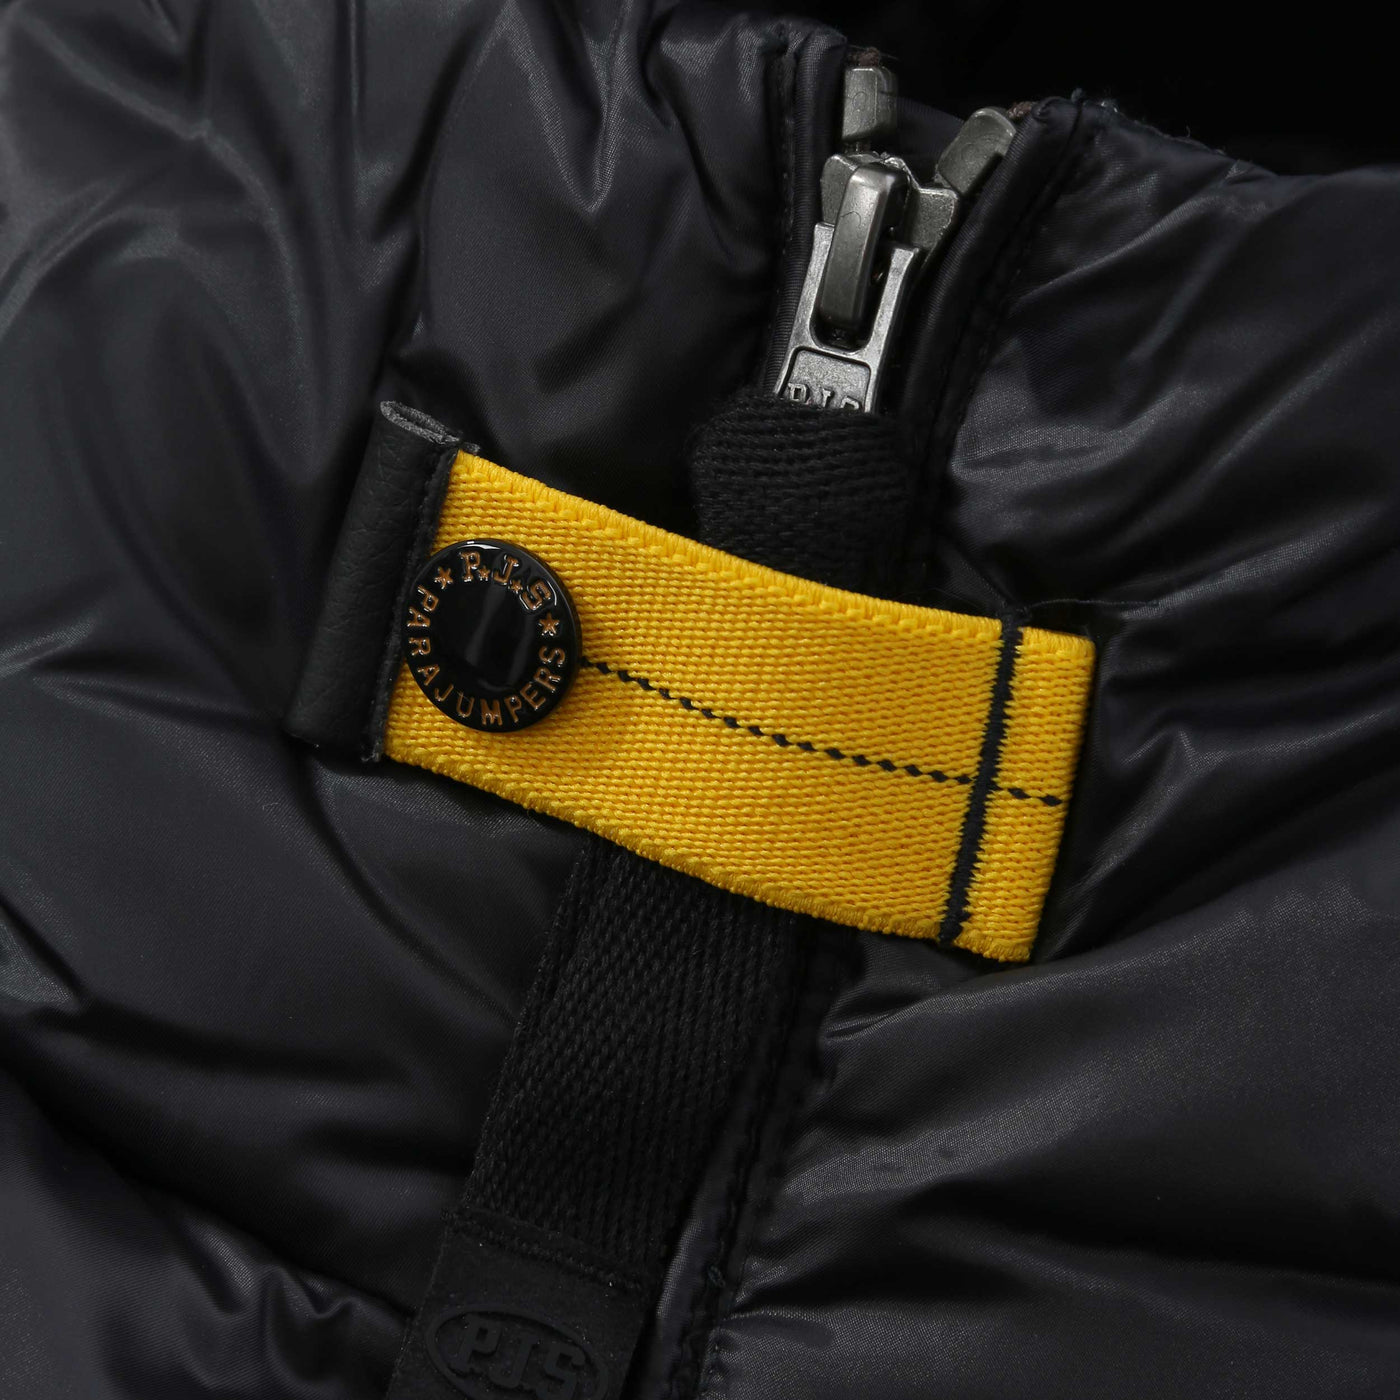 Parajumpers Pharrell Jacket in Pencil Throat Strap